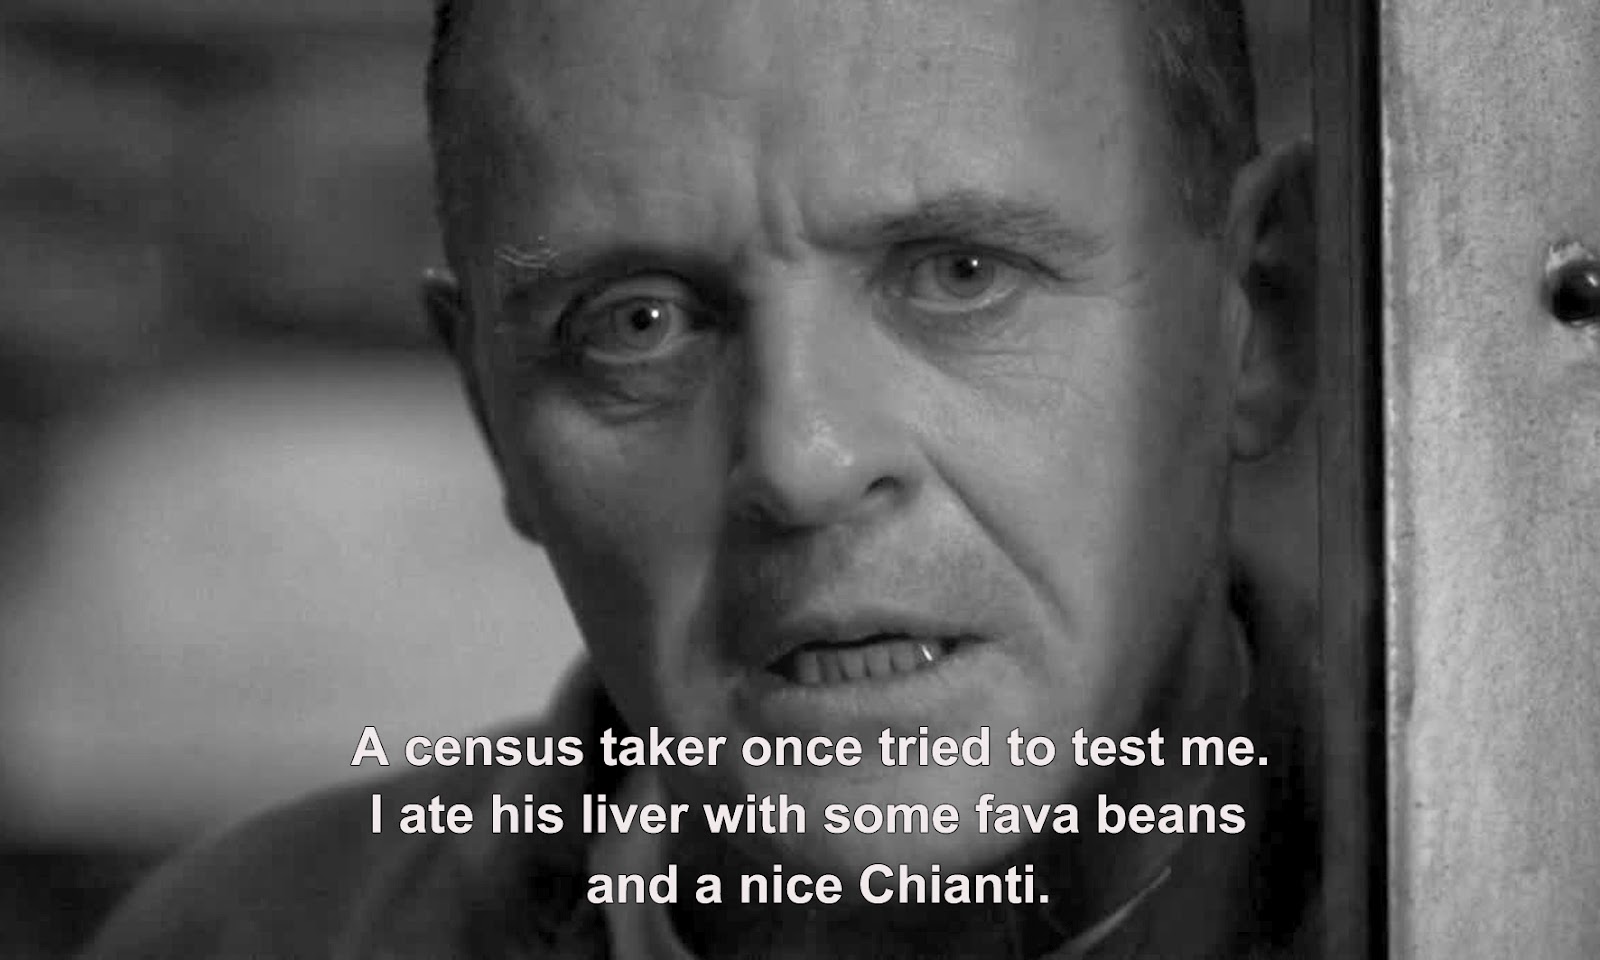 silence of the lambs fava beans - A census taker once tried to test me. I ate his liver with some fava beans and a nice Chianti.